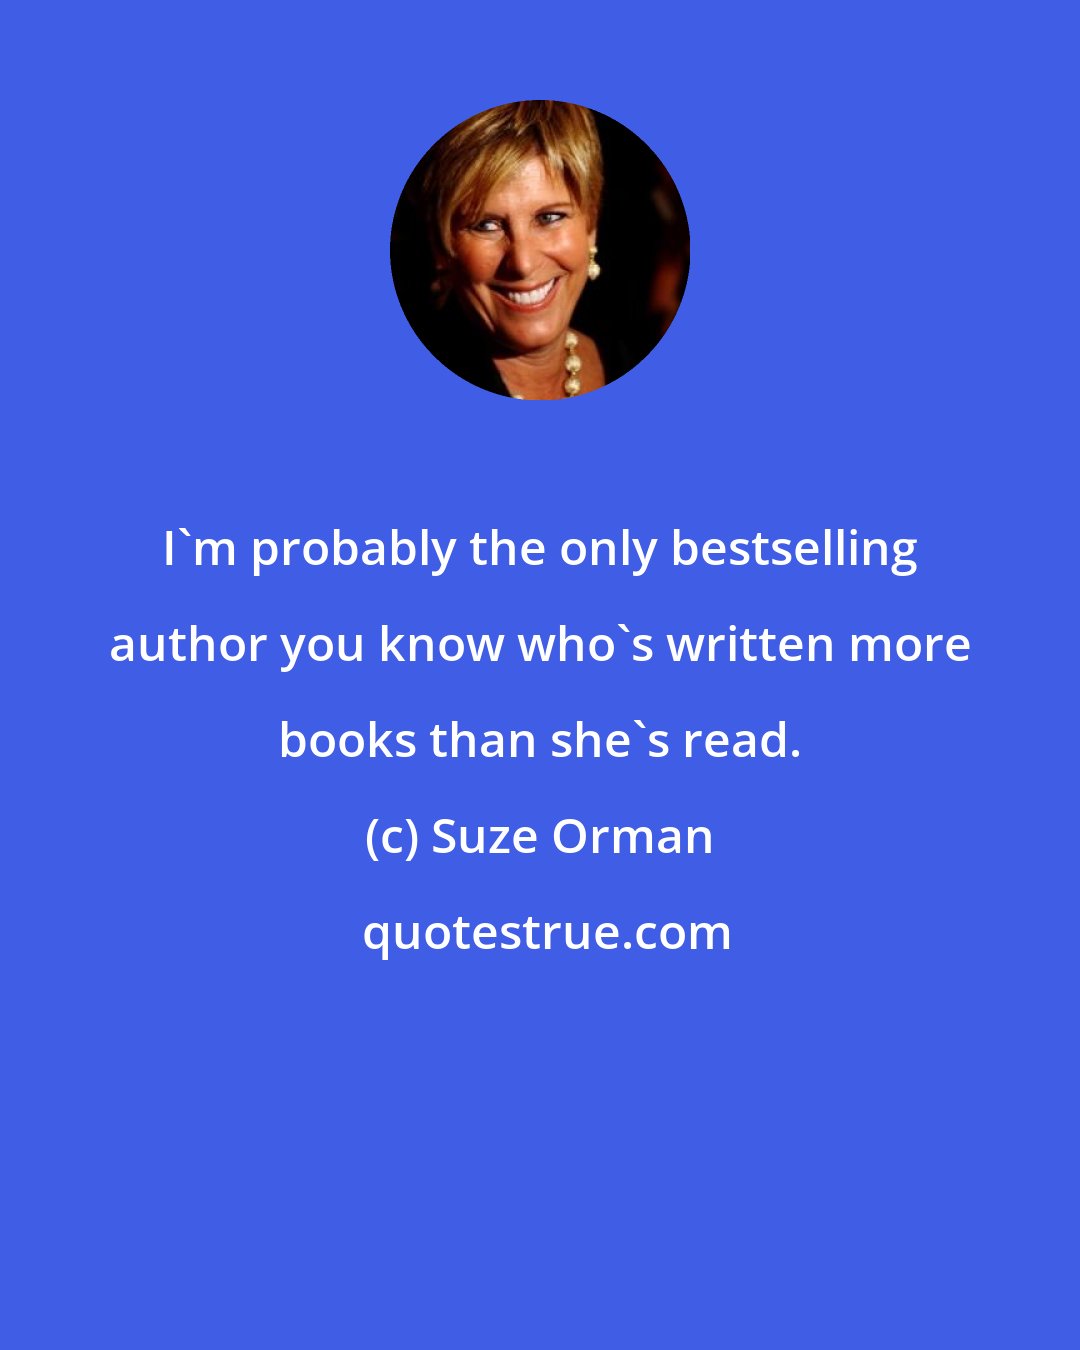 Suze Orman: I'm probably the only bestselling author you know who's written more books than she's read.